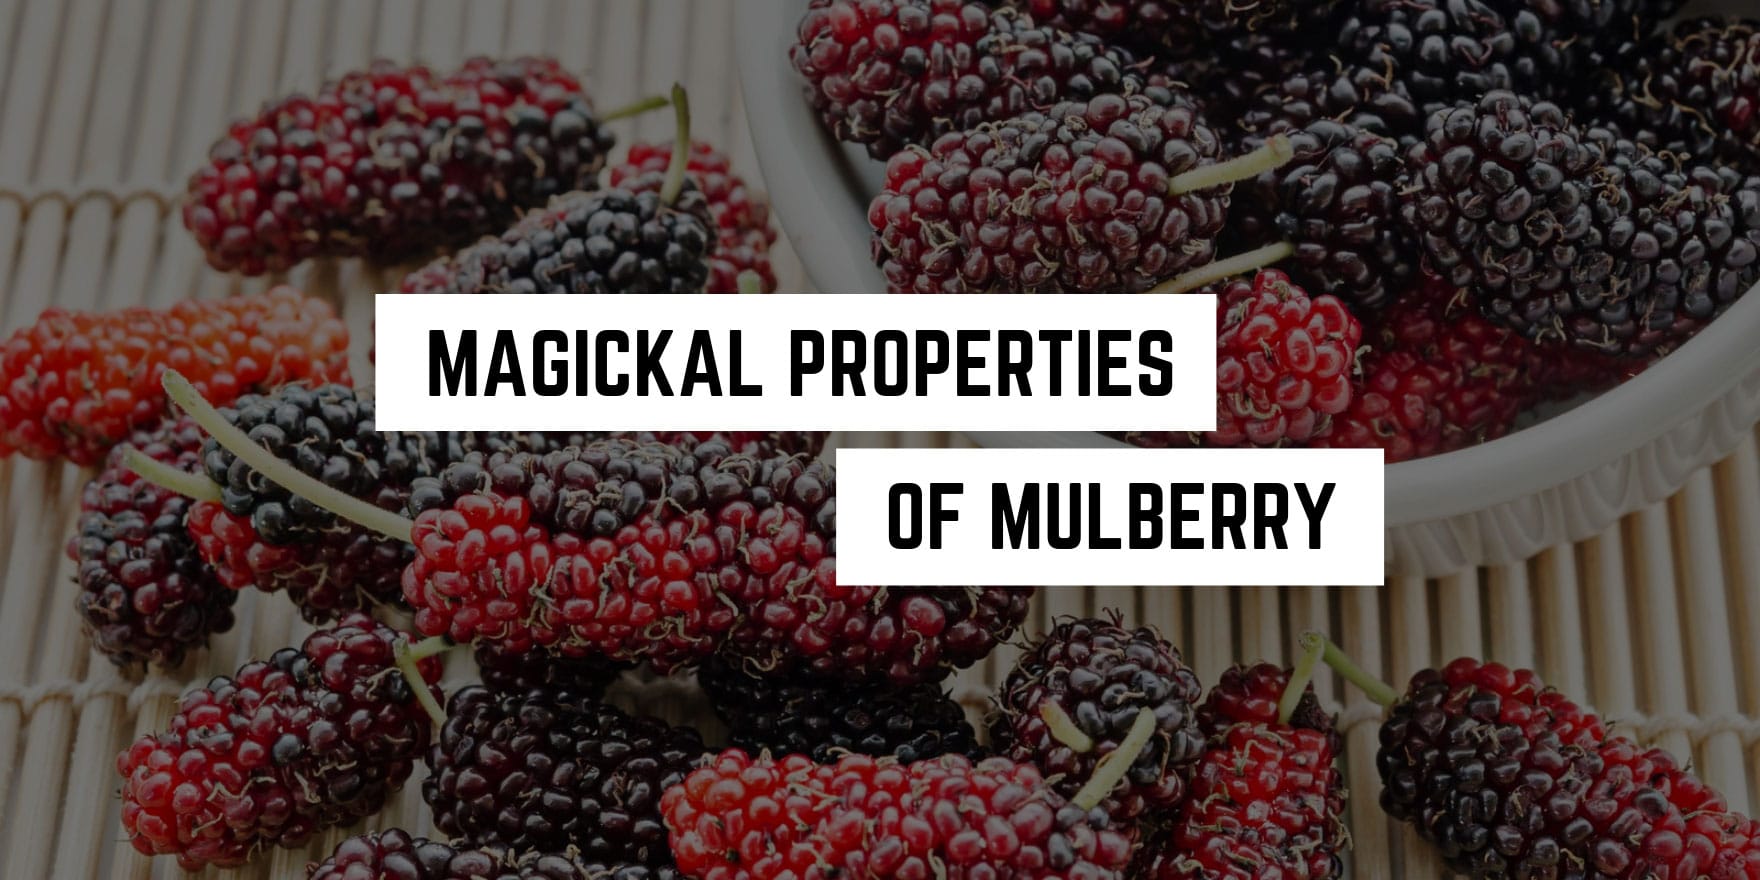 Magical Properties of Mulberry | Mulberry Materia Magicka